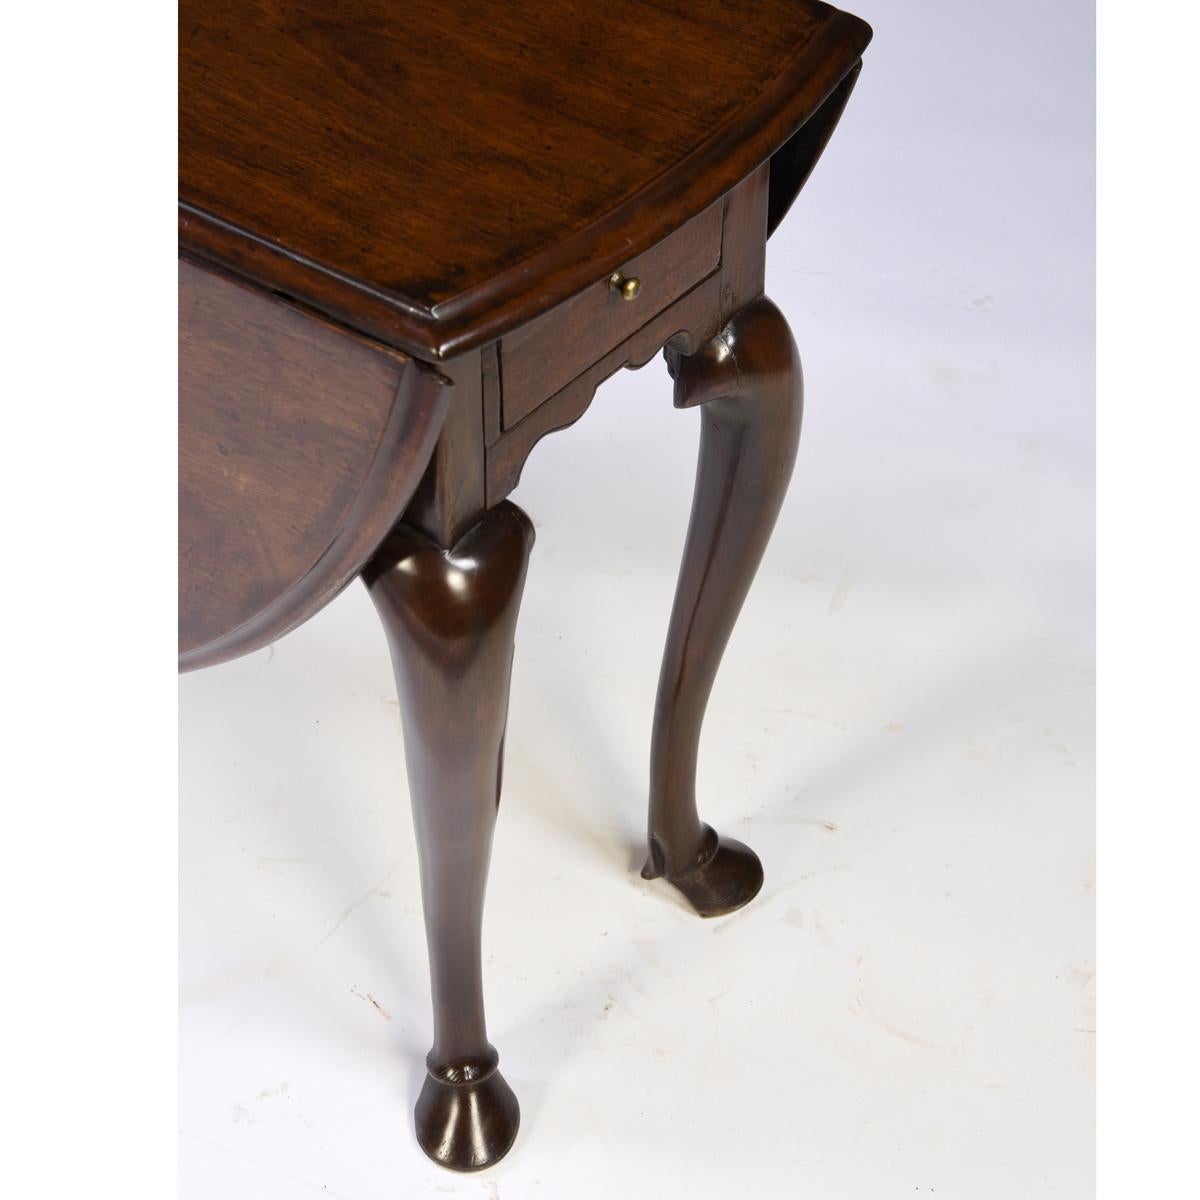 A very rare antique English George II mahogany drop-leaf table with cabriole legs and carved 